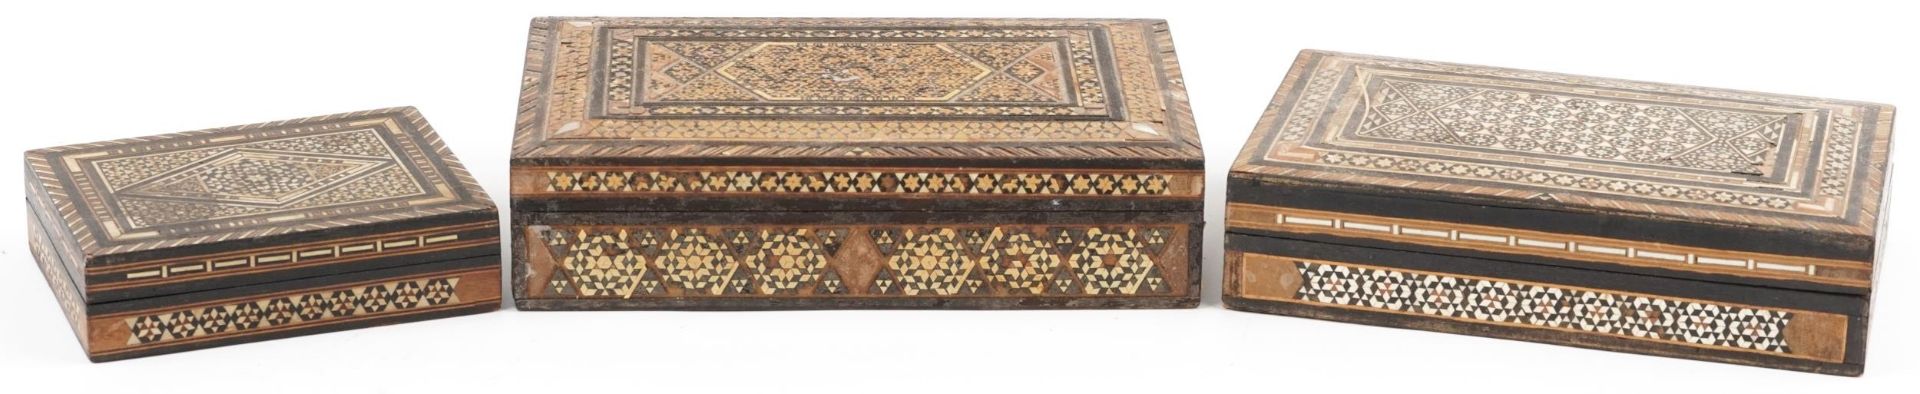 Three Syrian Moorish style rectangular inlaid wooden boxes, the largest 22cm wide